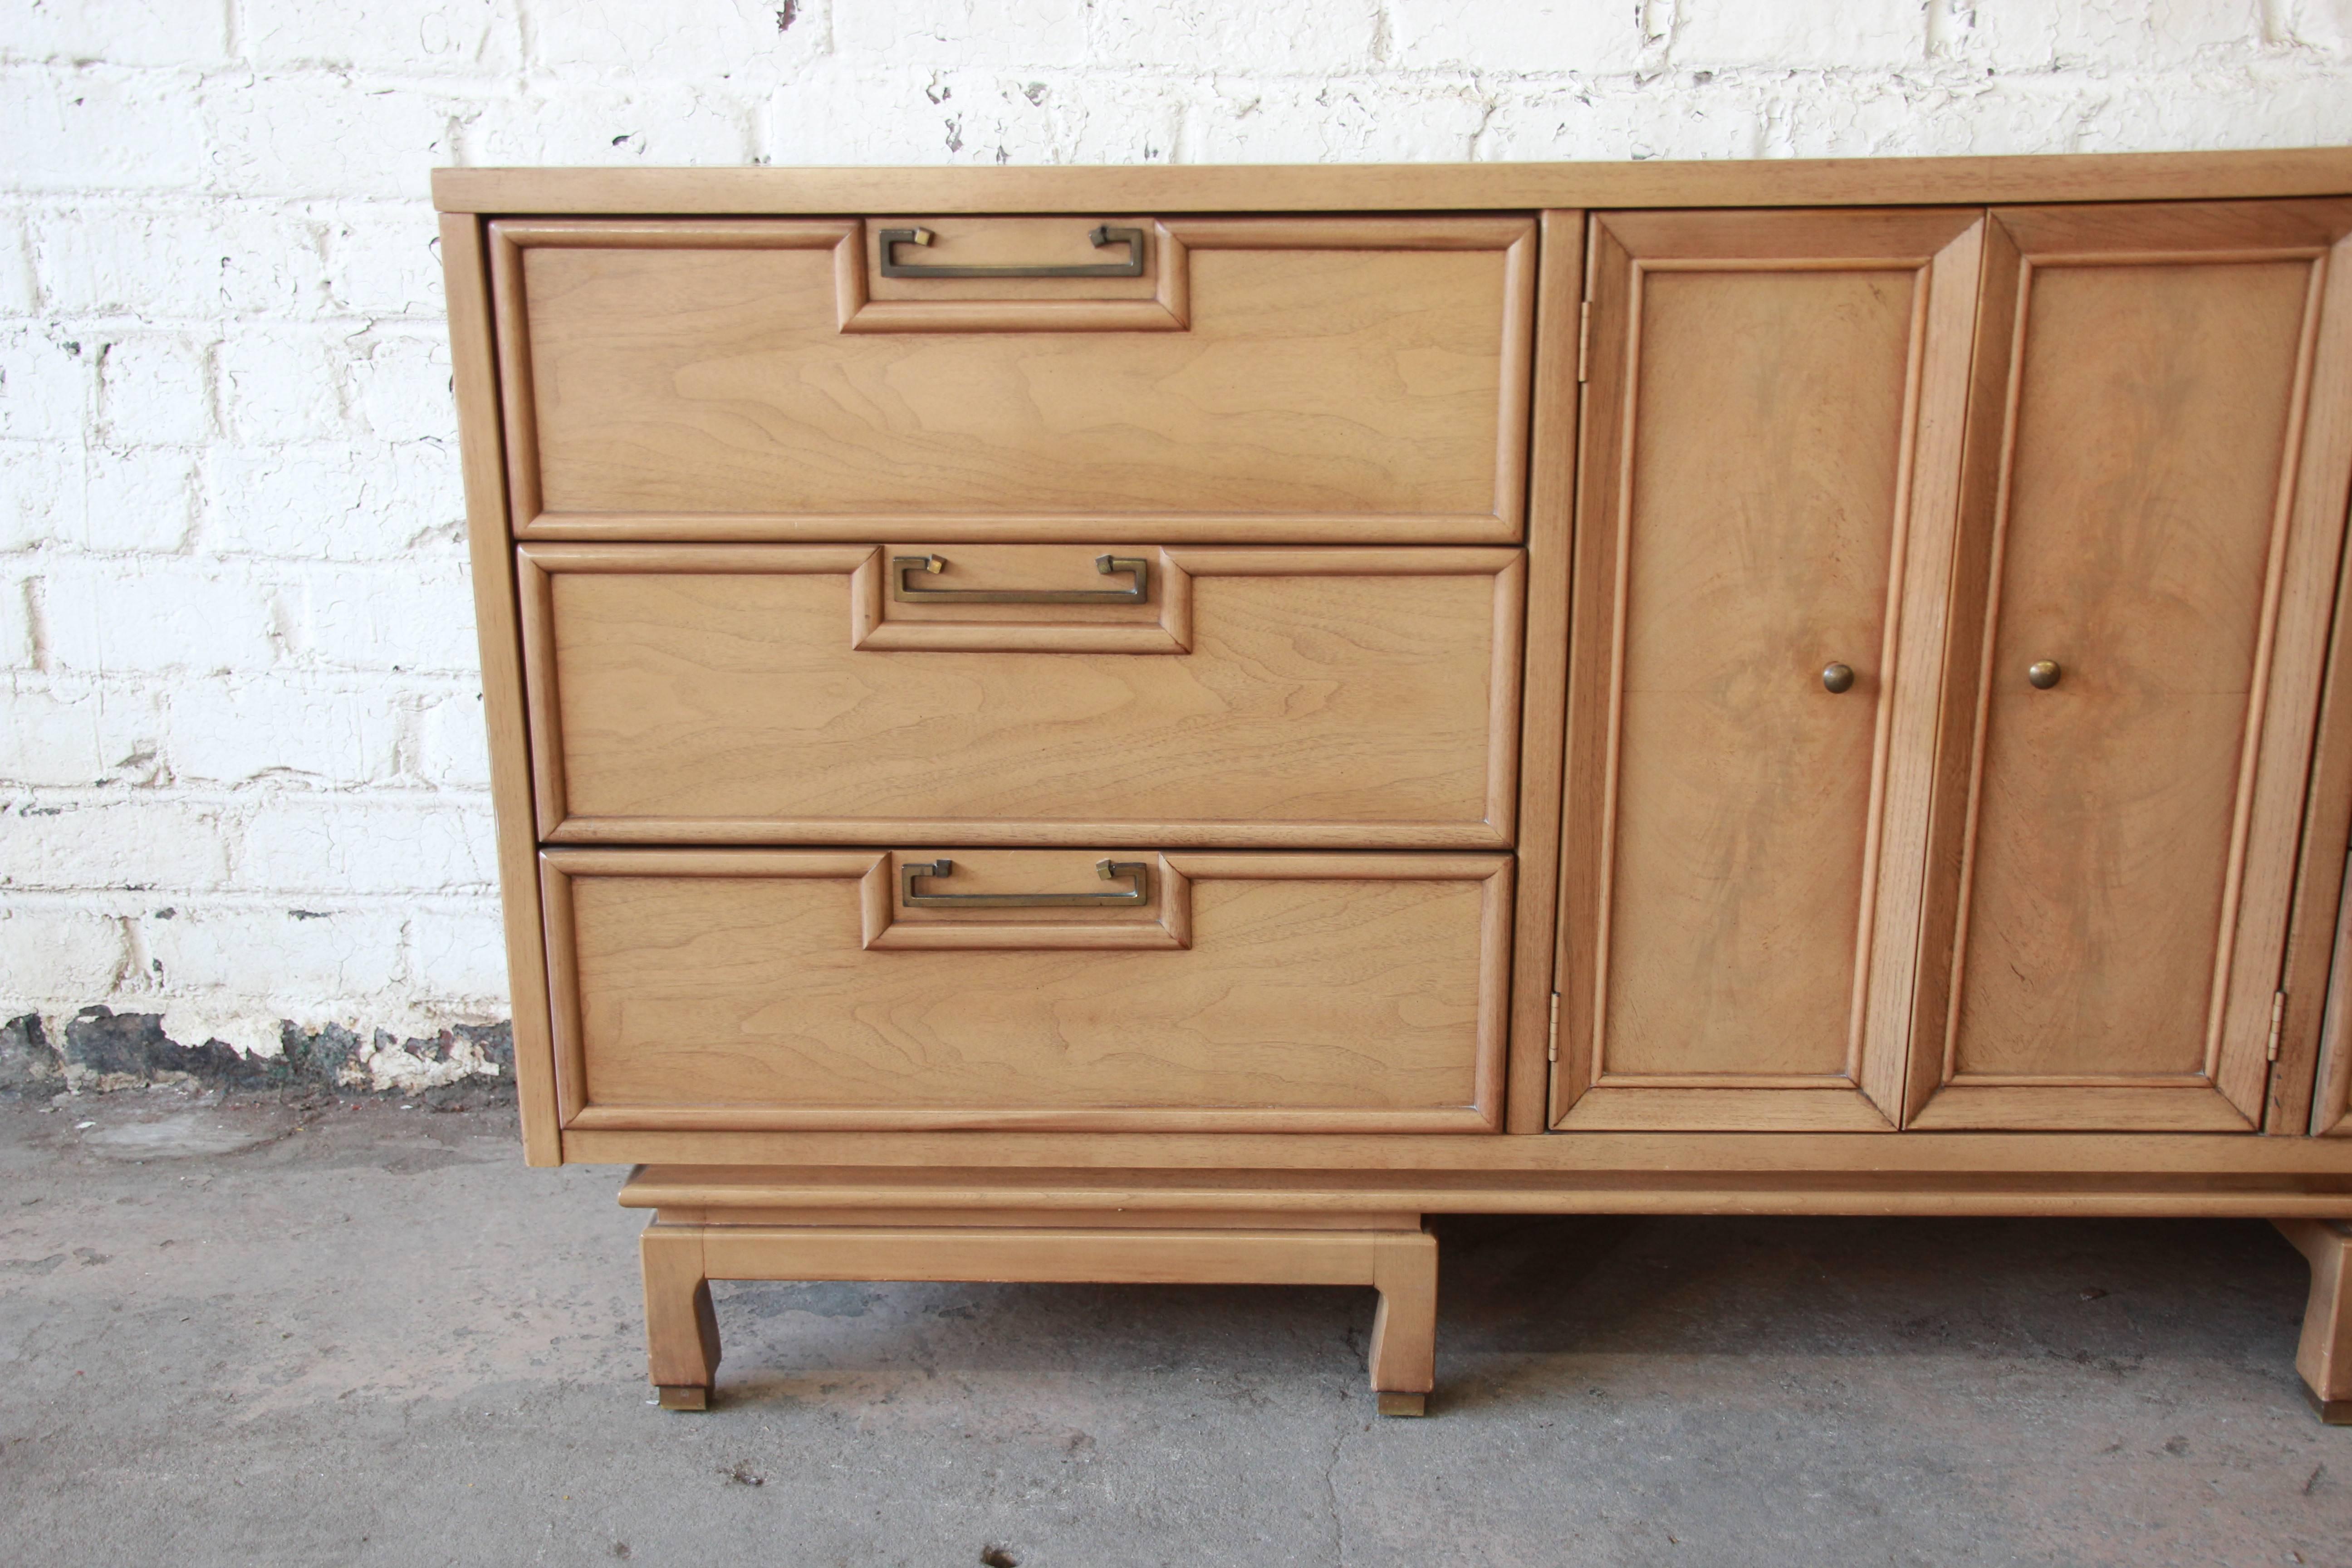 Bleached Hollywood Regency Mid-Century Chinoiserie Credenza by Merton Gershun